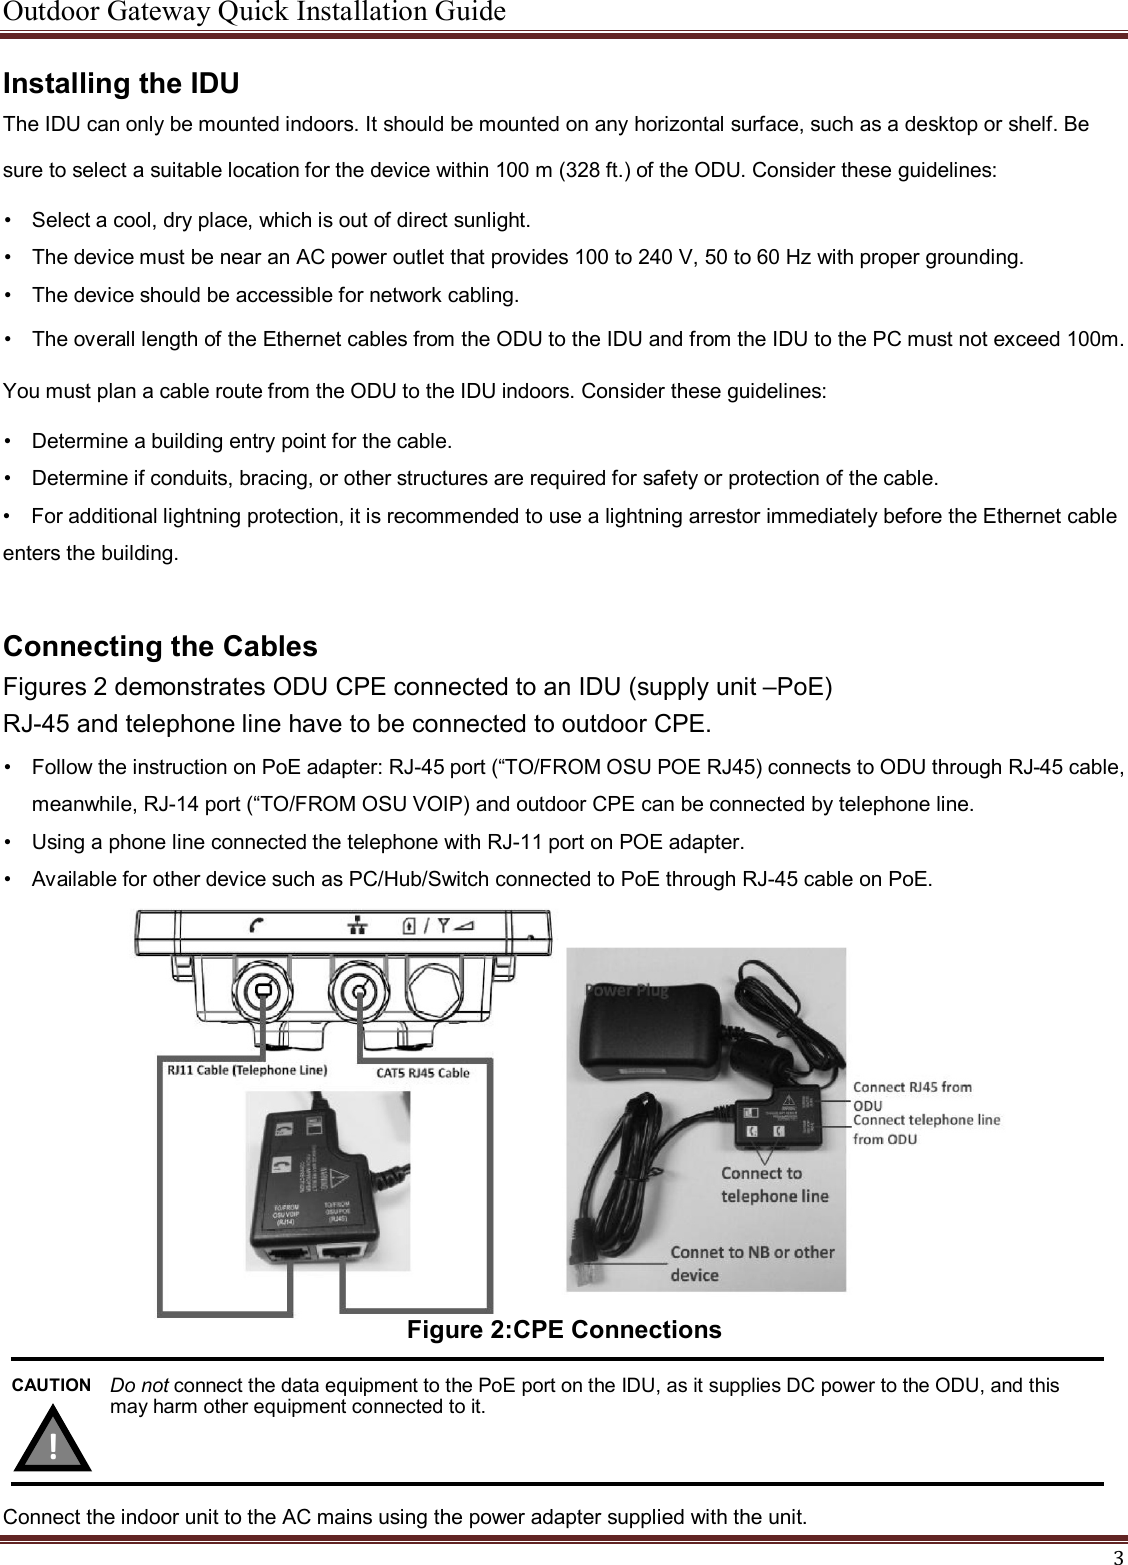 Outdoor Gateway Quick Installation Guide    3 Installing the IDU The IDU can only be mounted indoors. It should be mounted on any horizontal surface, such as a desktop or shelf. Be sure to select a suitable location for the device within 100 m (328 ft.) of the ODU. Consider these guidelines:  •  Select a cool, dry place, which is out of direct sunlight.   •  The device must be near an AC power outlet that provides 100 to 240 V, 50 to 60 Hz with proper grounding.   •  The device should be accessible for network cabling.   •  The overall length of the Ethernet cables from the ODU to the IDU and from the IDU to the PC must not exceed 100m. You must plan a cable route from the ODU to the IDU indoors. Consider these guidelines:    •  Determine a building entry point for the cable.   •  Determine if conduits, bracing, or other structures are required for safety or protection of the cable.   •    For additional lightning protection, it is recommended to use a lightning arrestor immediately before the Ethernet cable enters the building.  Connecting the Cables  Figures 2 demonstrates ODU CPE connected to an IDU (supply unit –PoE) RJ-45 and telephone line have to be connected to outdoor CPE.  •  Follow the instruction on PoE adapter: RJ-45 port (“TO/FROM OSU POE RJ45) connects to ODU through RJ-45 cable, meanwhile, RJ-14 port (“TO/FROM OSU VOIP) and outdoor CPE can be connected by telephone line.   •  Using a phone line connected the telephone with RJ-11 port on POE adapter. •  Available for other device such as PC/Hub/Switch connected to PoE through RJ-45 cable on PoE.              Figure 2:CPE Connections     Connect the indoor unit to the AC mains using the power adapter supplied with the unit. Do not connect the data equipment to the PoE port on the IDU, as it supplies DC power to the ODU, and this may harm other equipment connected to it.  CAUTION  ! 